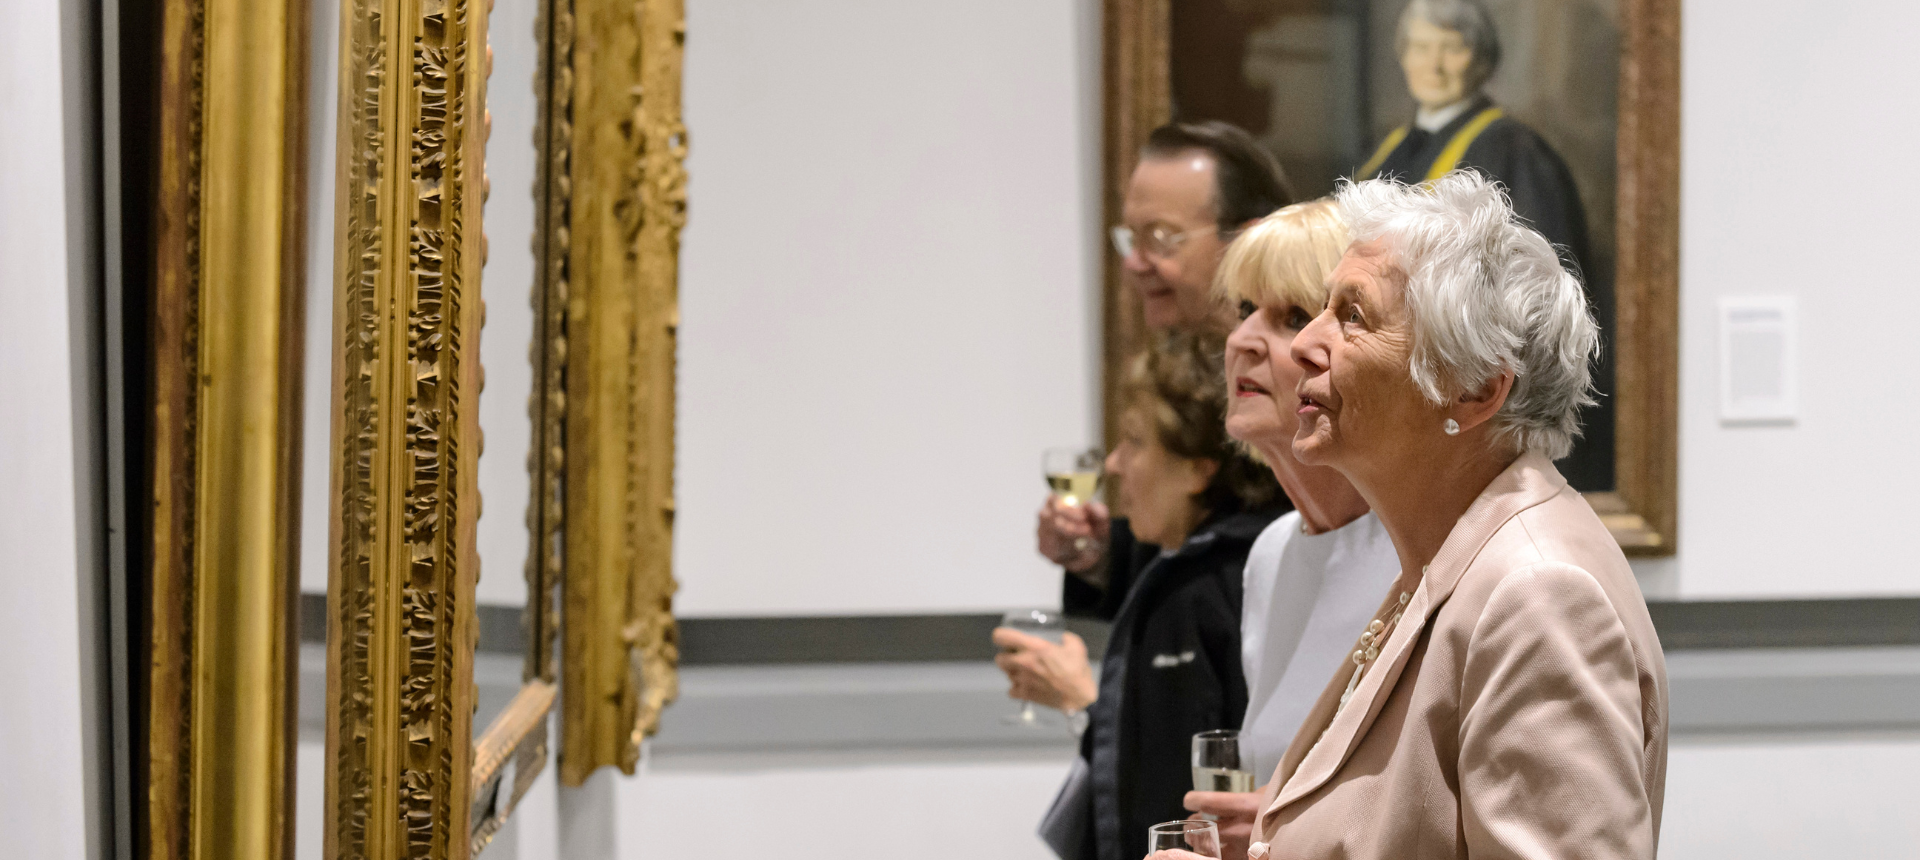 Several people looking at artworks, some holding wine glasses.